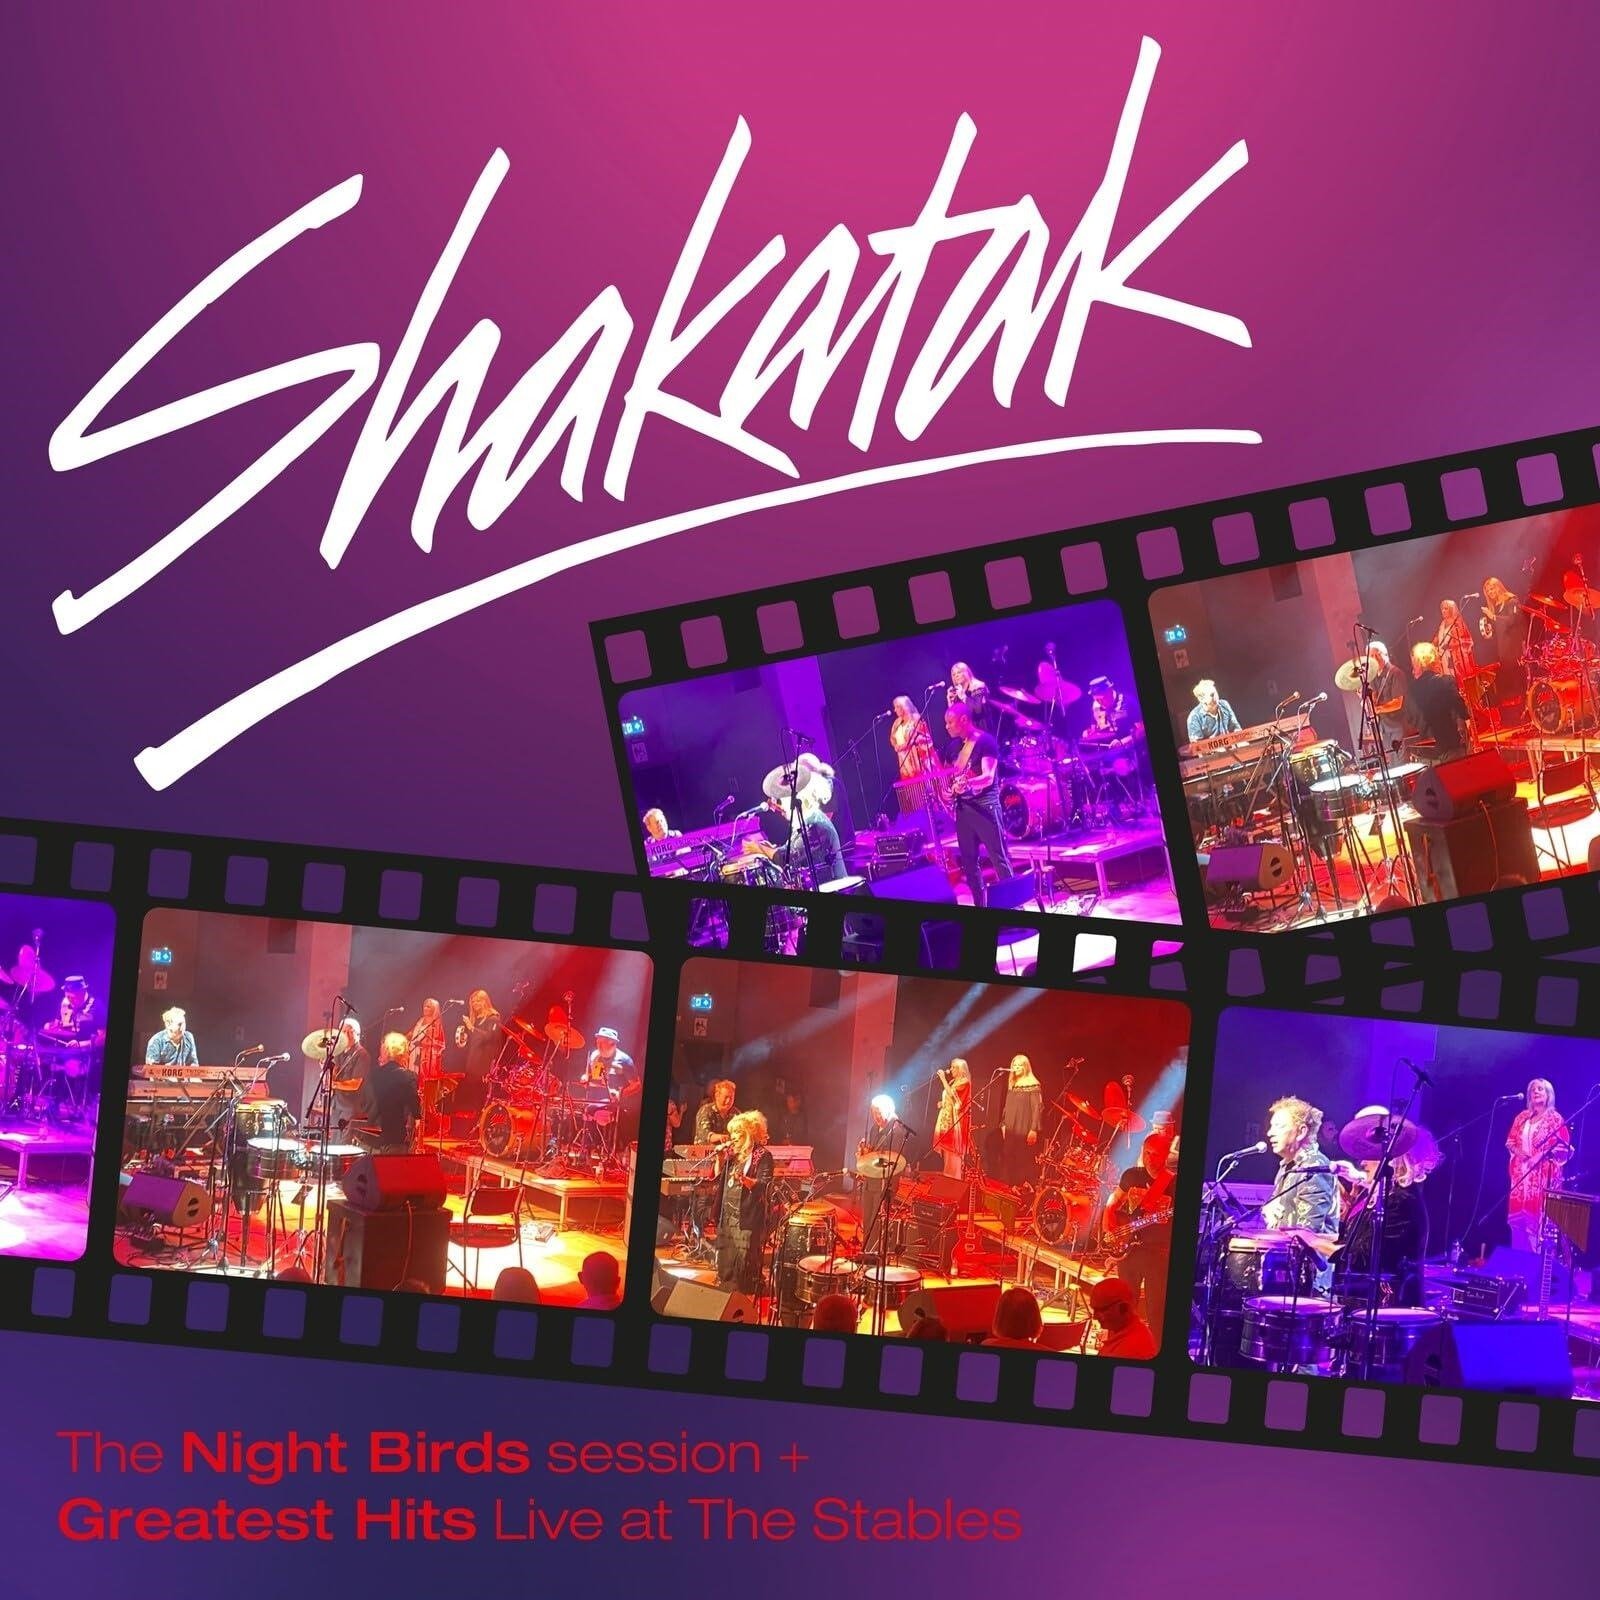 CD Shop - SHAKATAK NIGHTBIRDS SESSION + GREATEST HITS LIVE AT THE STABLES